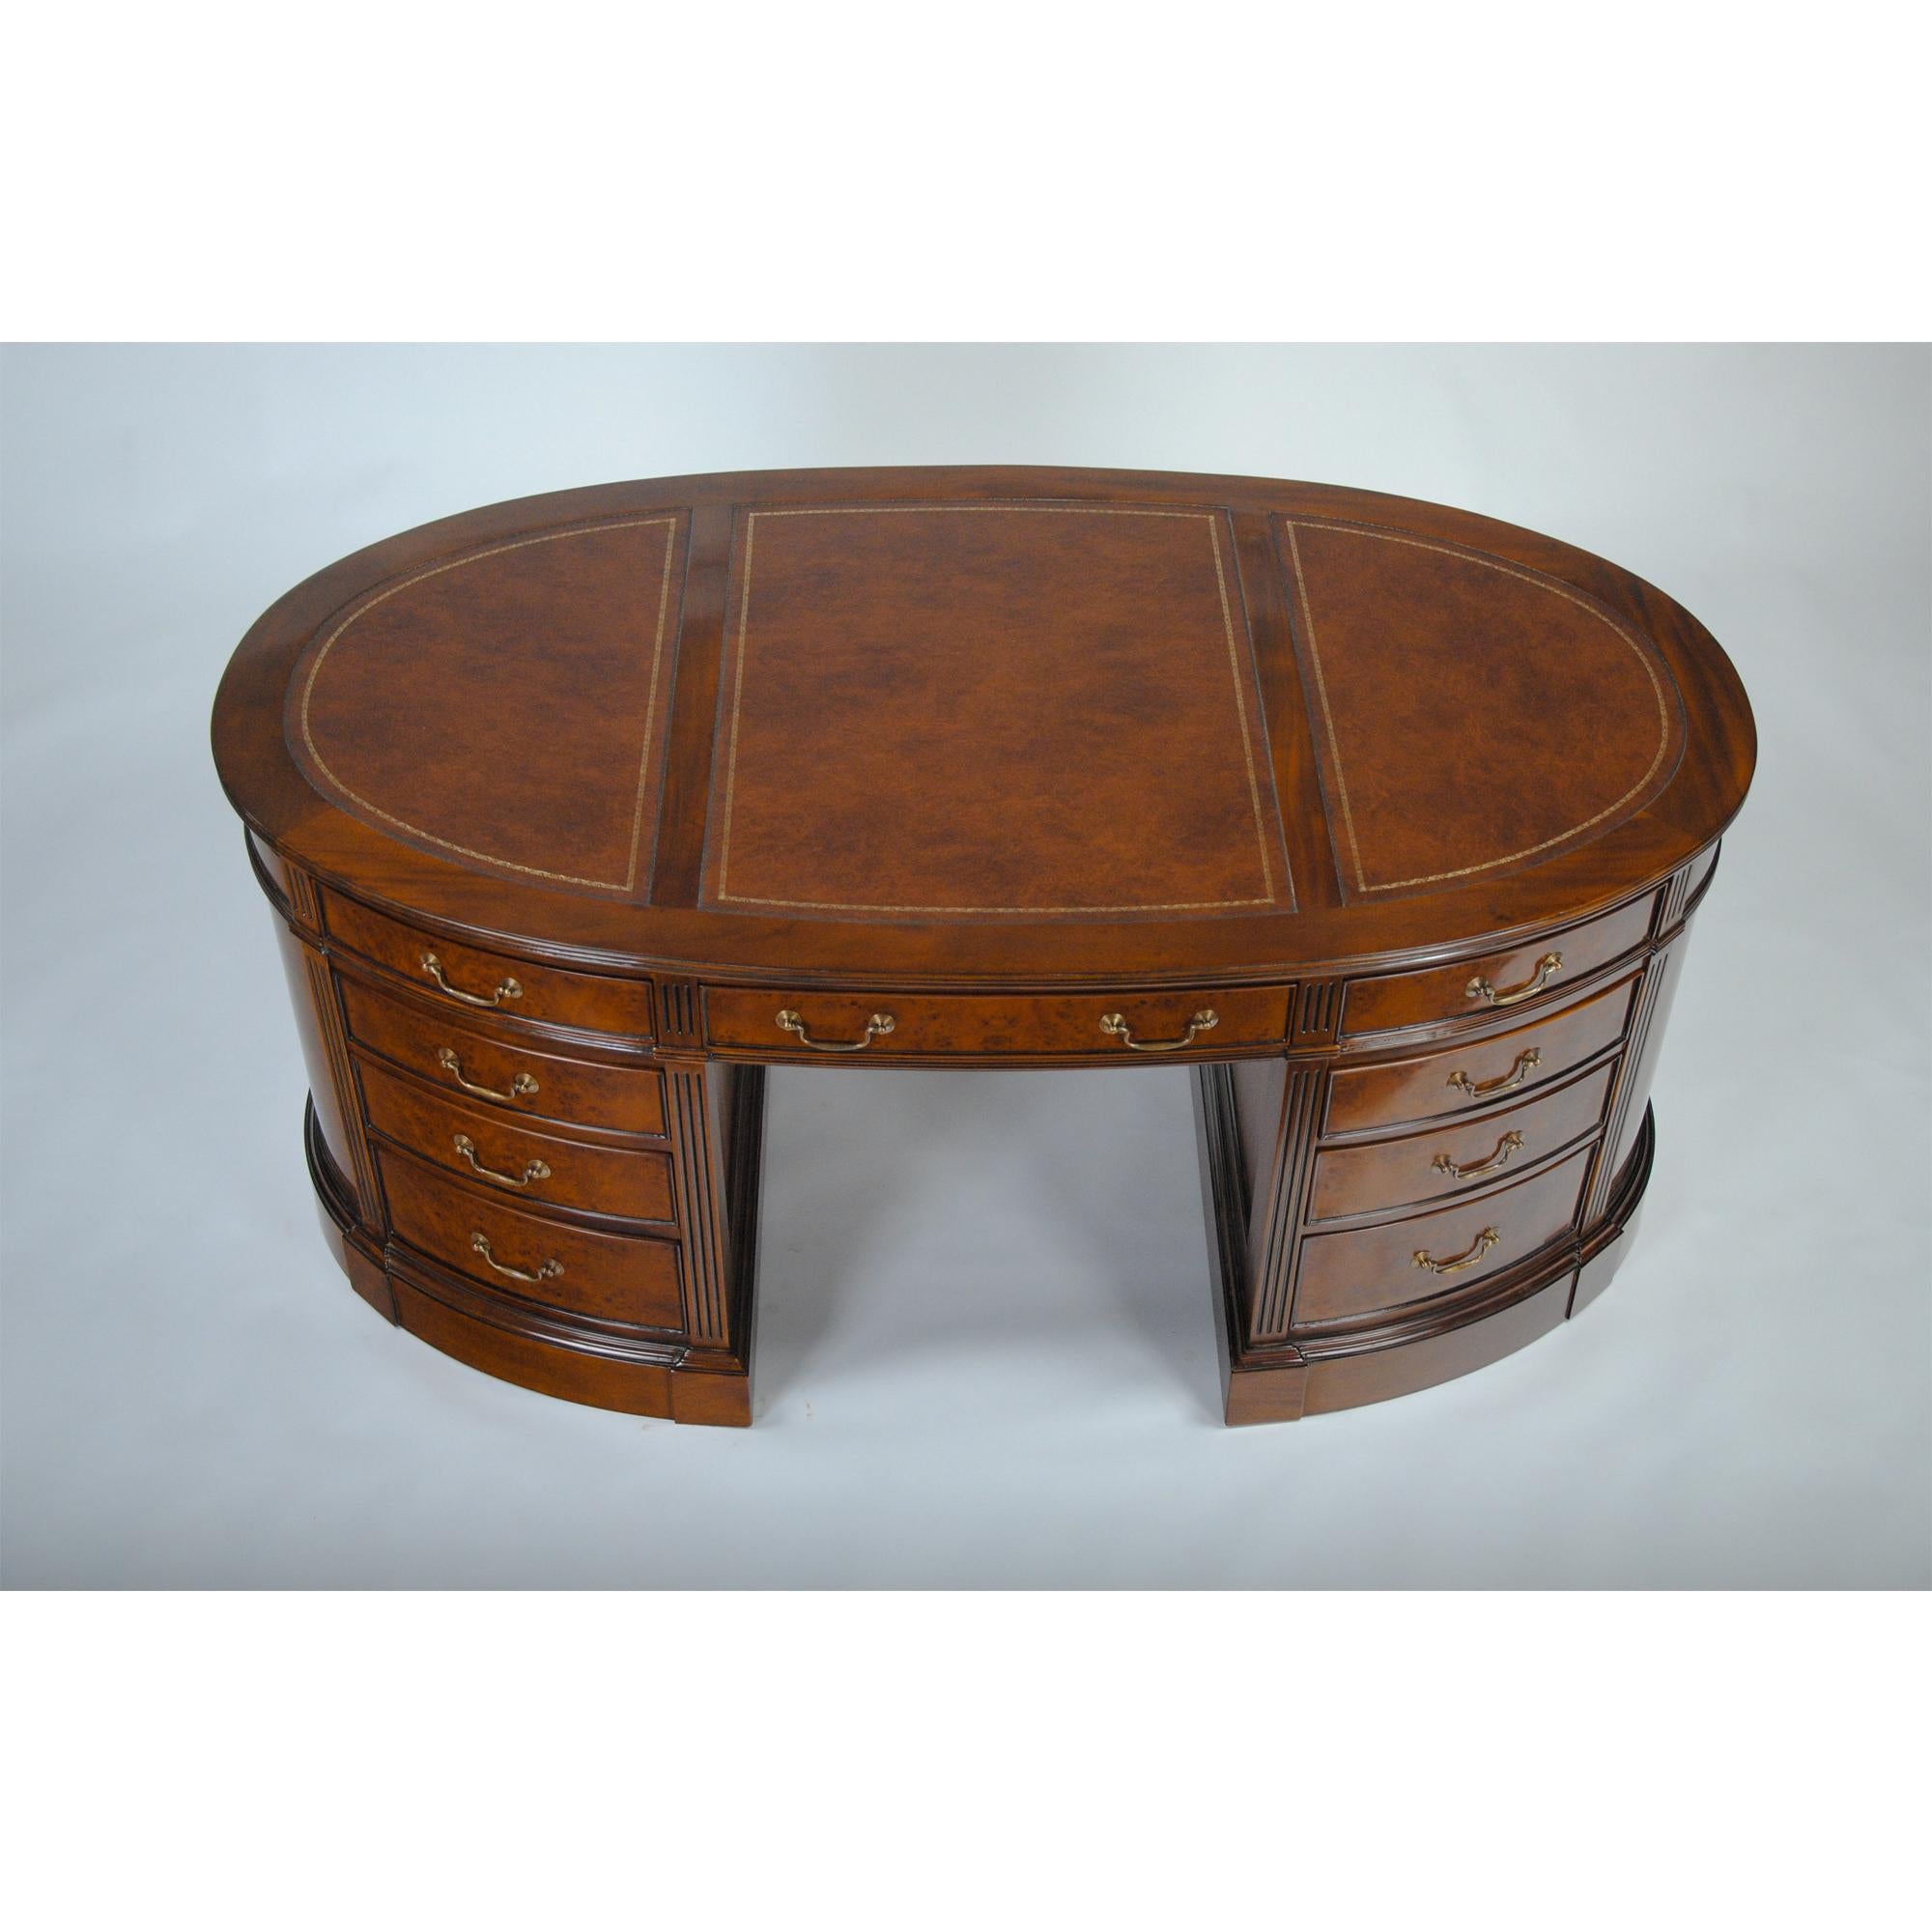 Contemporary Burled Oval Partners Desk